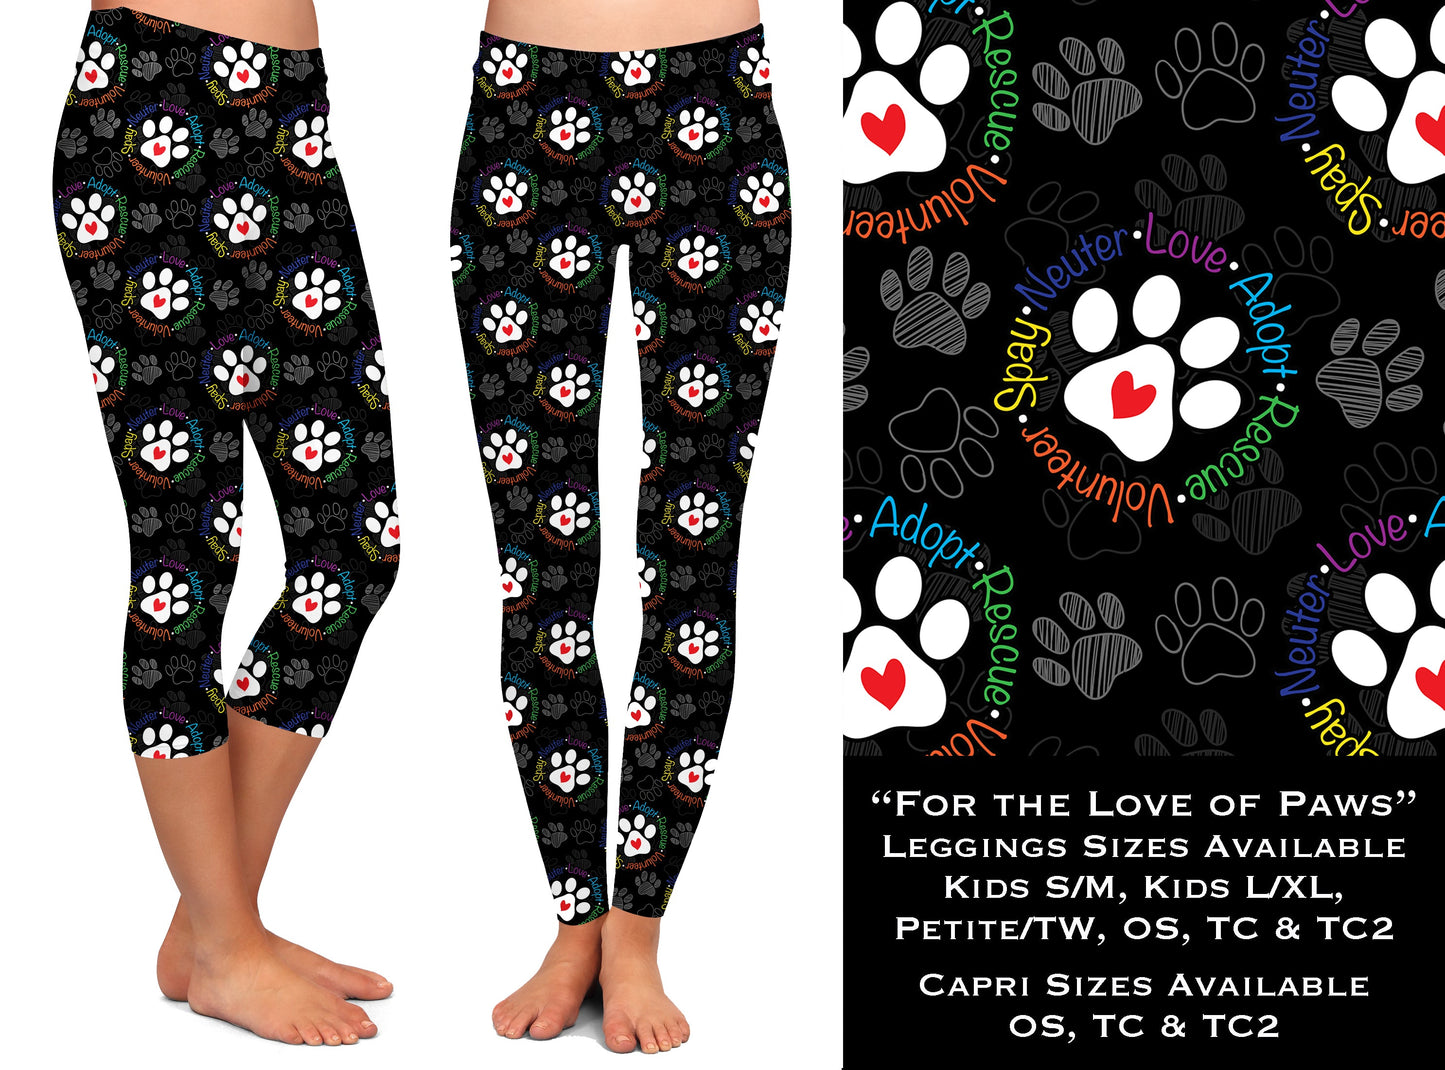 For The Love of Paws - Leggings & Capris